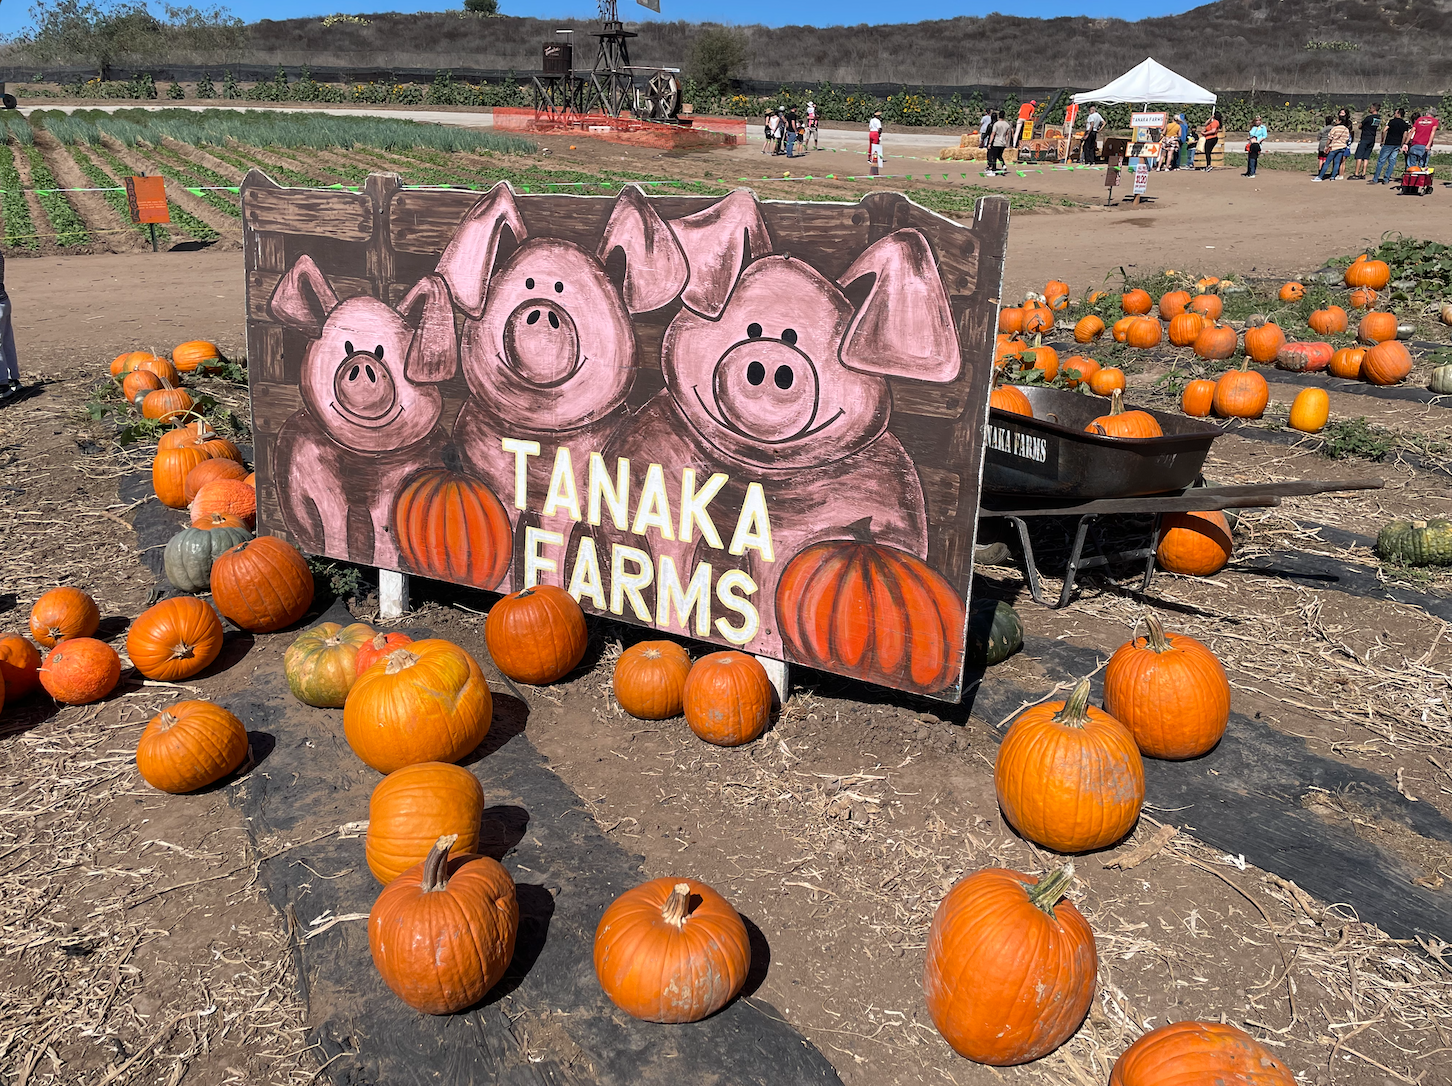 Enjoy fun photos ops with different farm animals while you pick your pumpkin